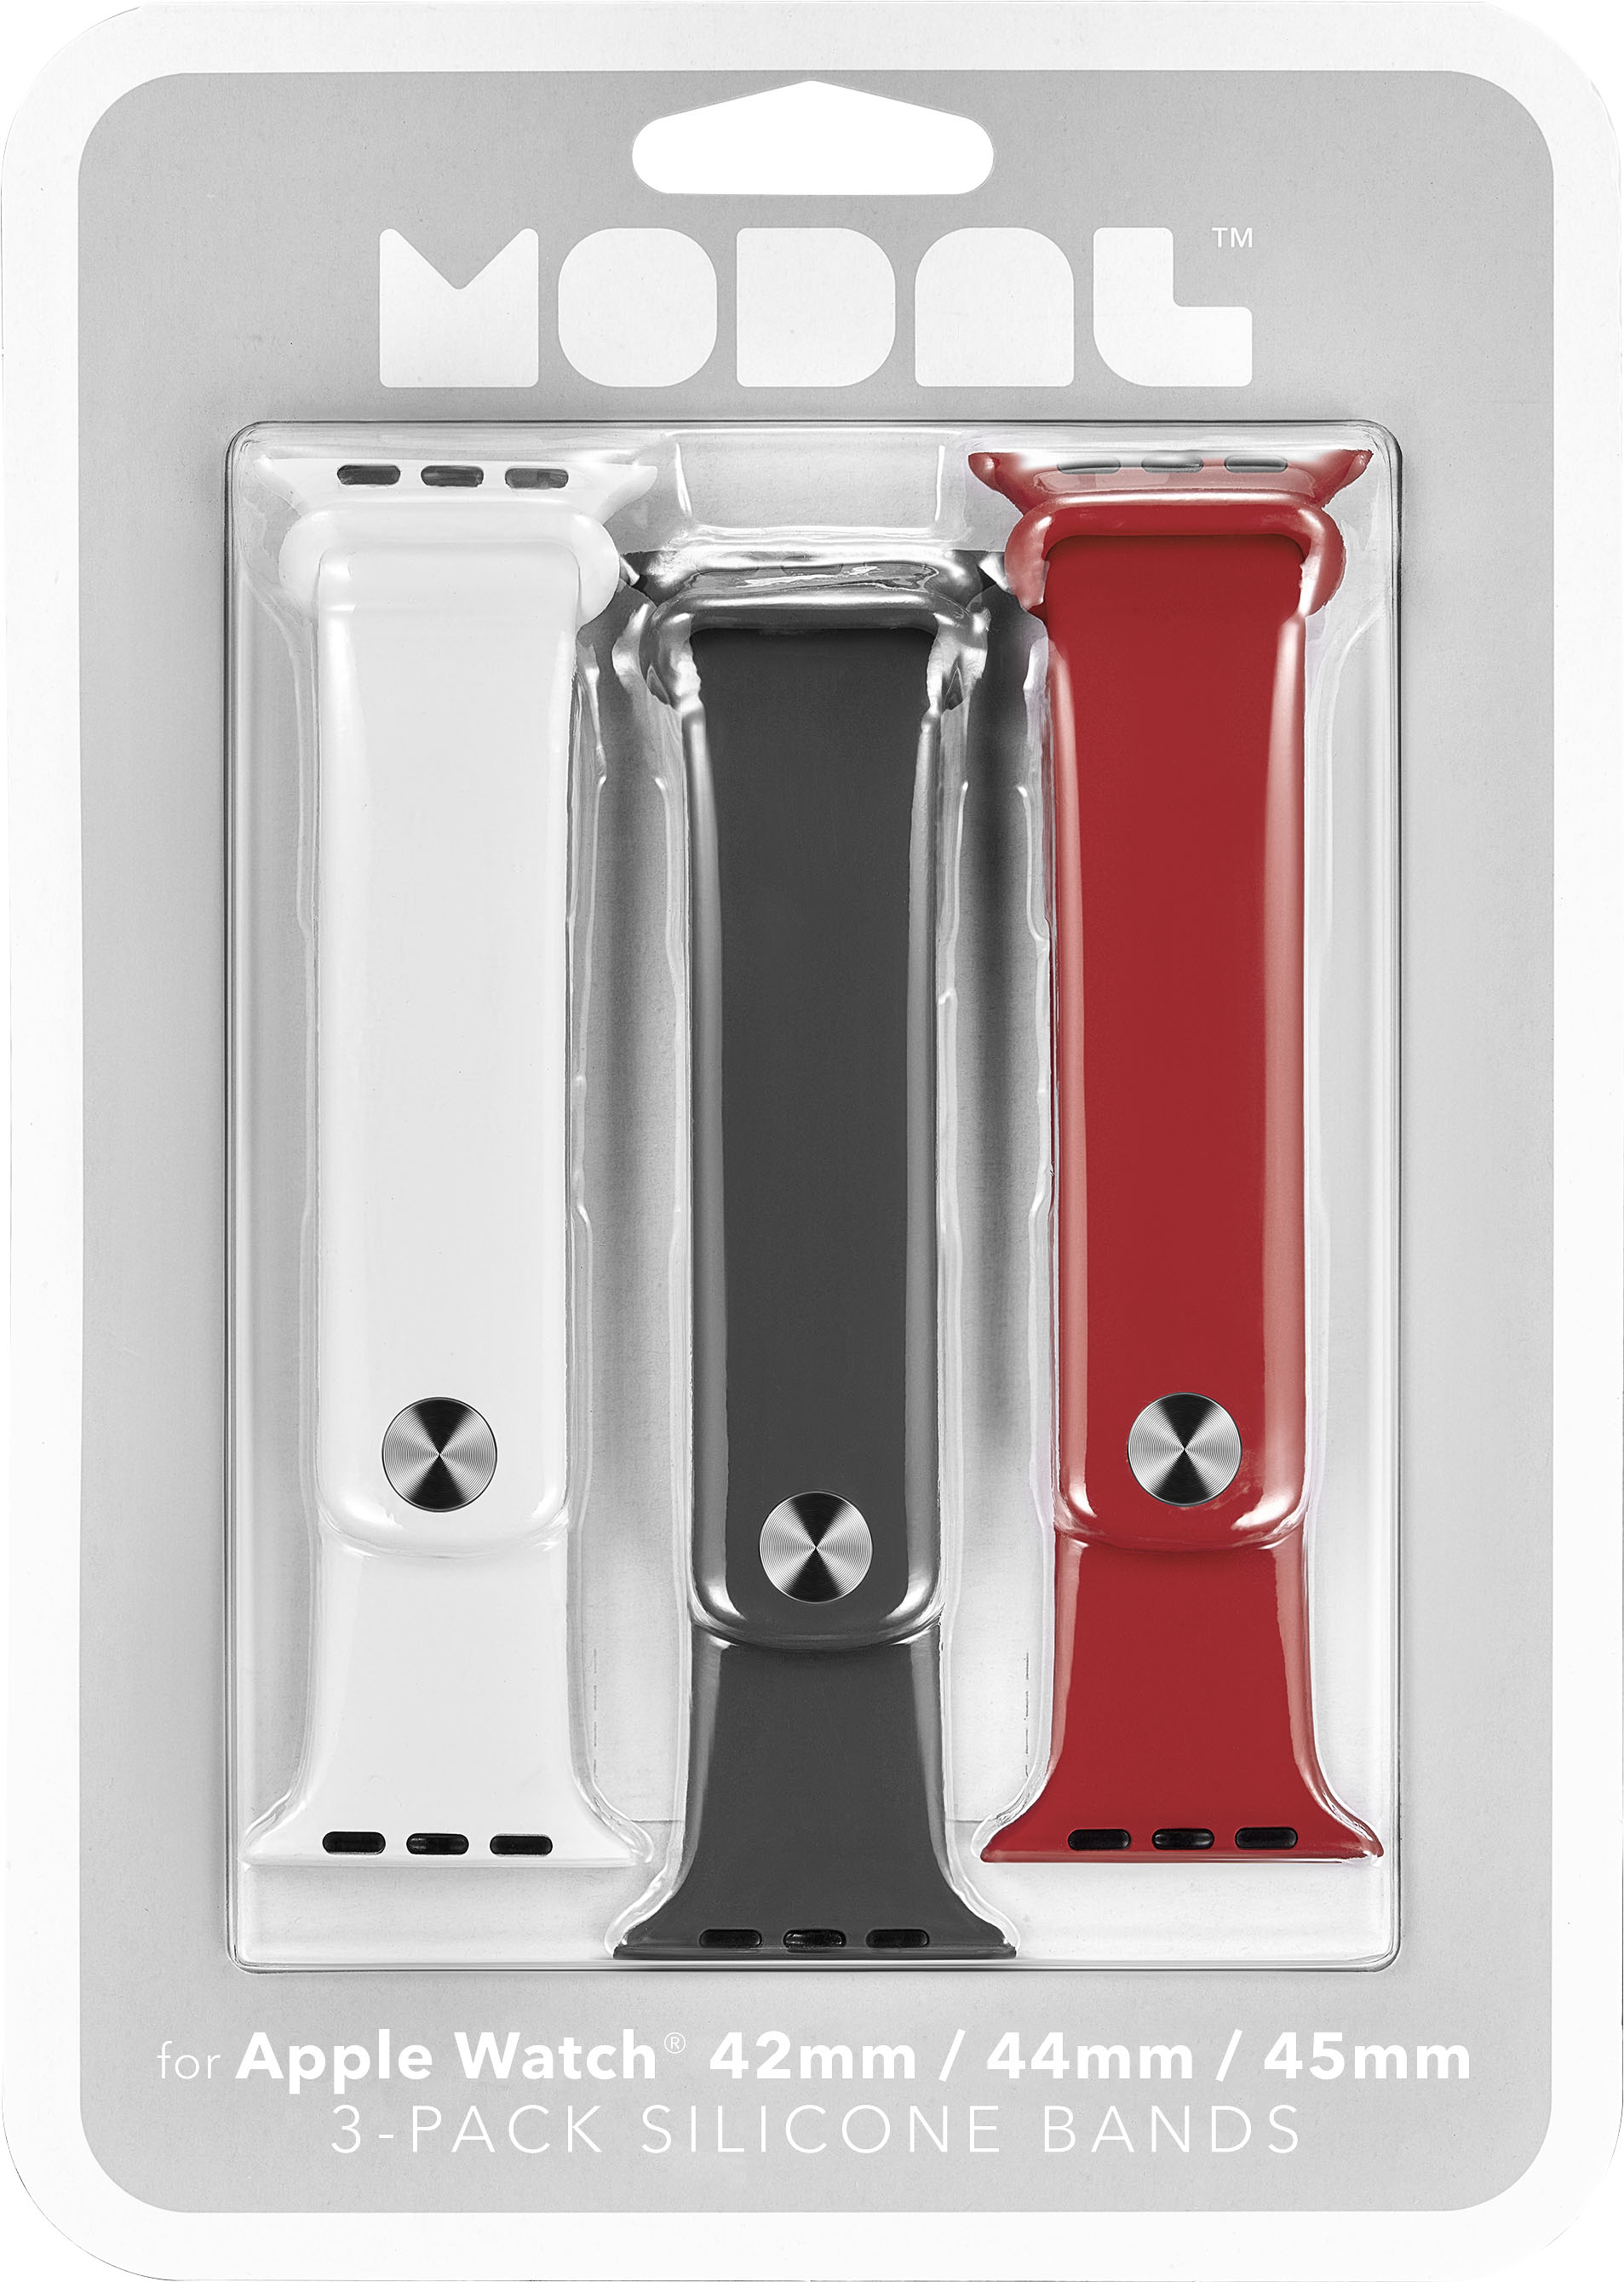 Angle View: Modal™ - Silicone Watch Band for Apple Watch 42 mm / 44 mm and Apple Watch Series 7 45mm (3 Pack) - Candy apple red, snow white and stormy gray